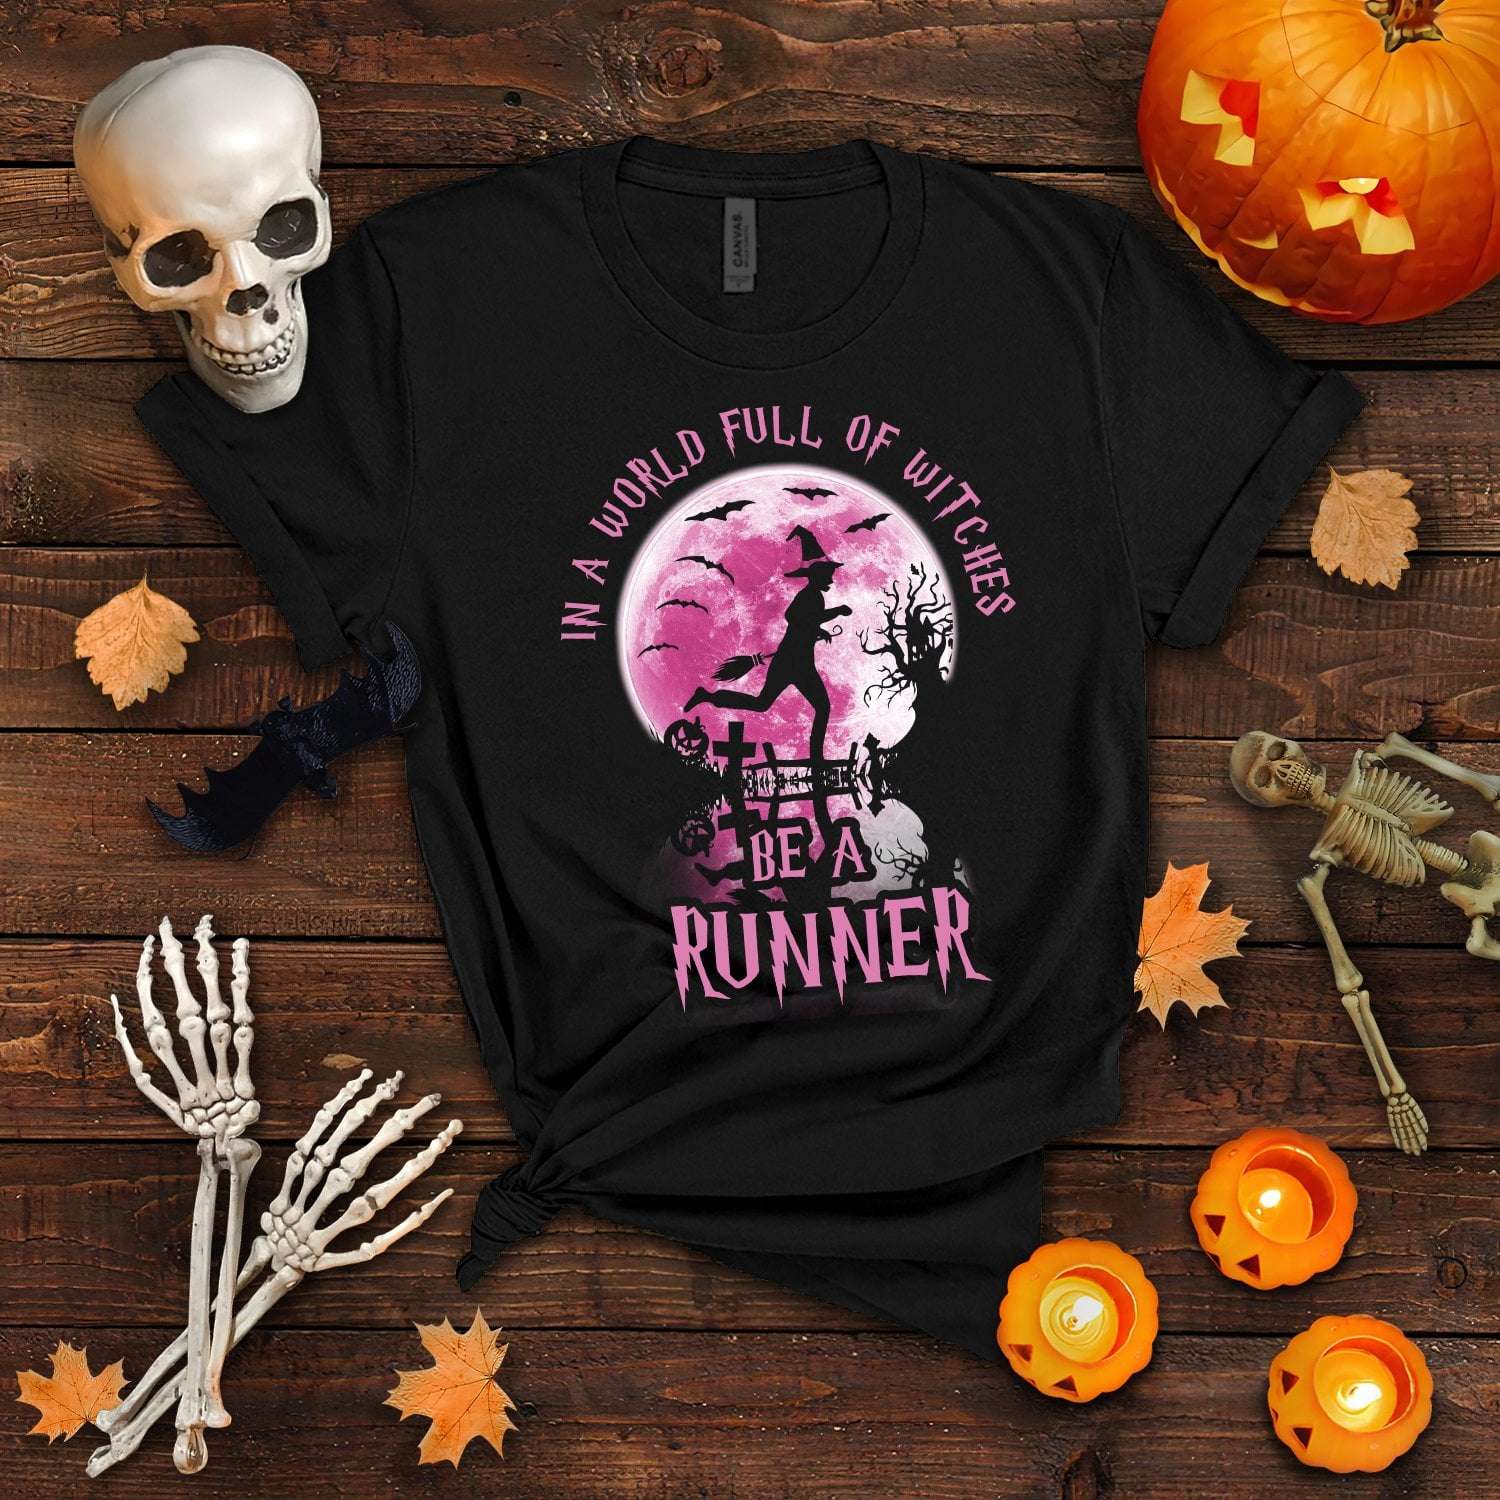 Witch Running - In a world full of witches be a runner